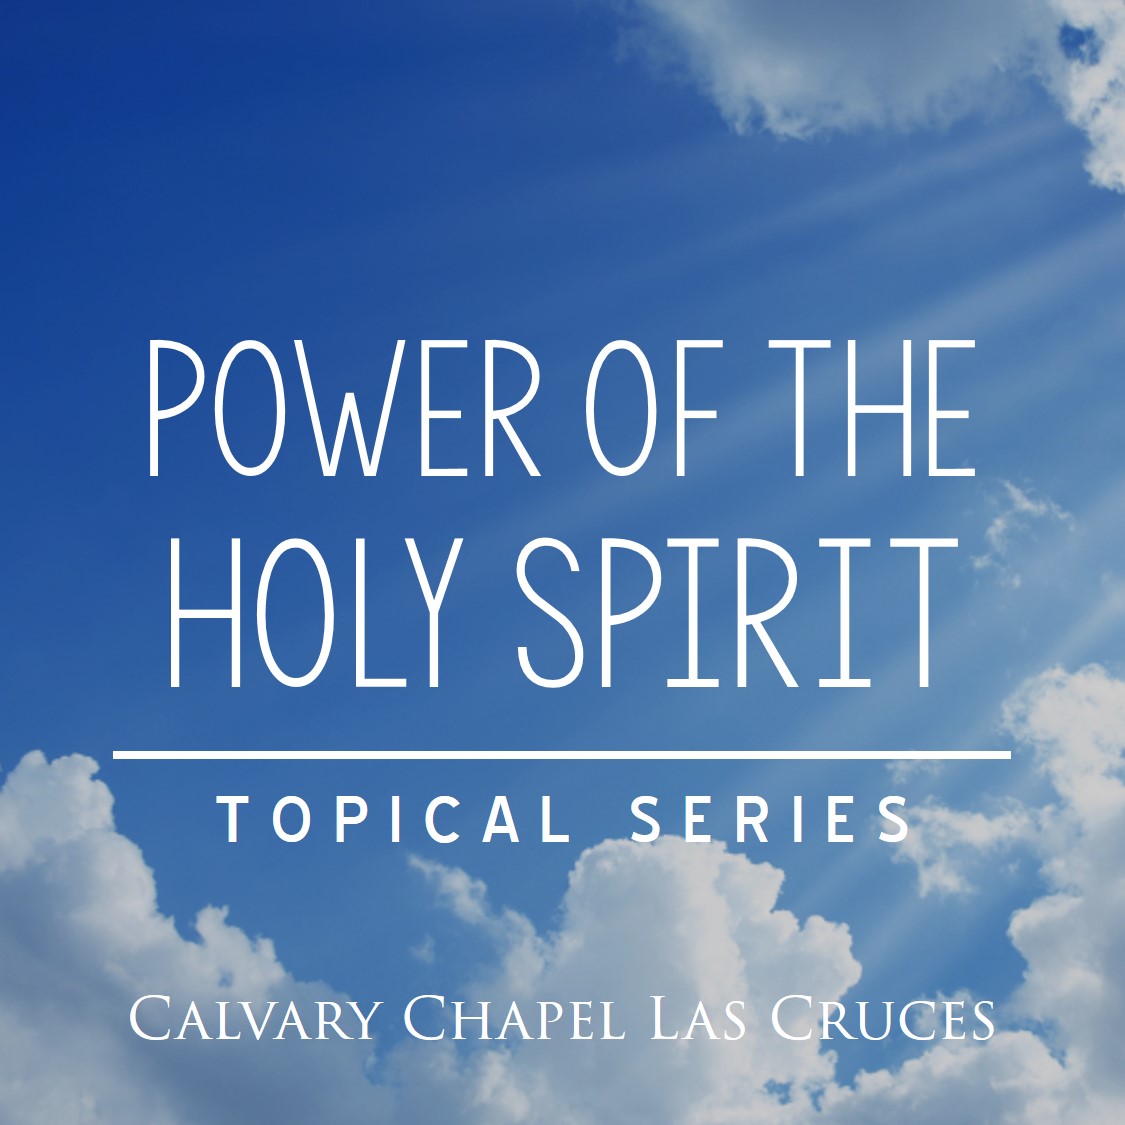 The Power of the Holy Spirit, Part 3